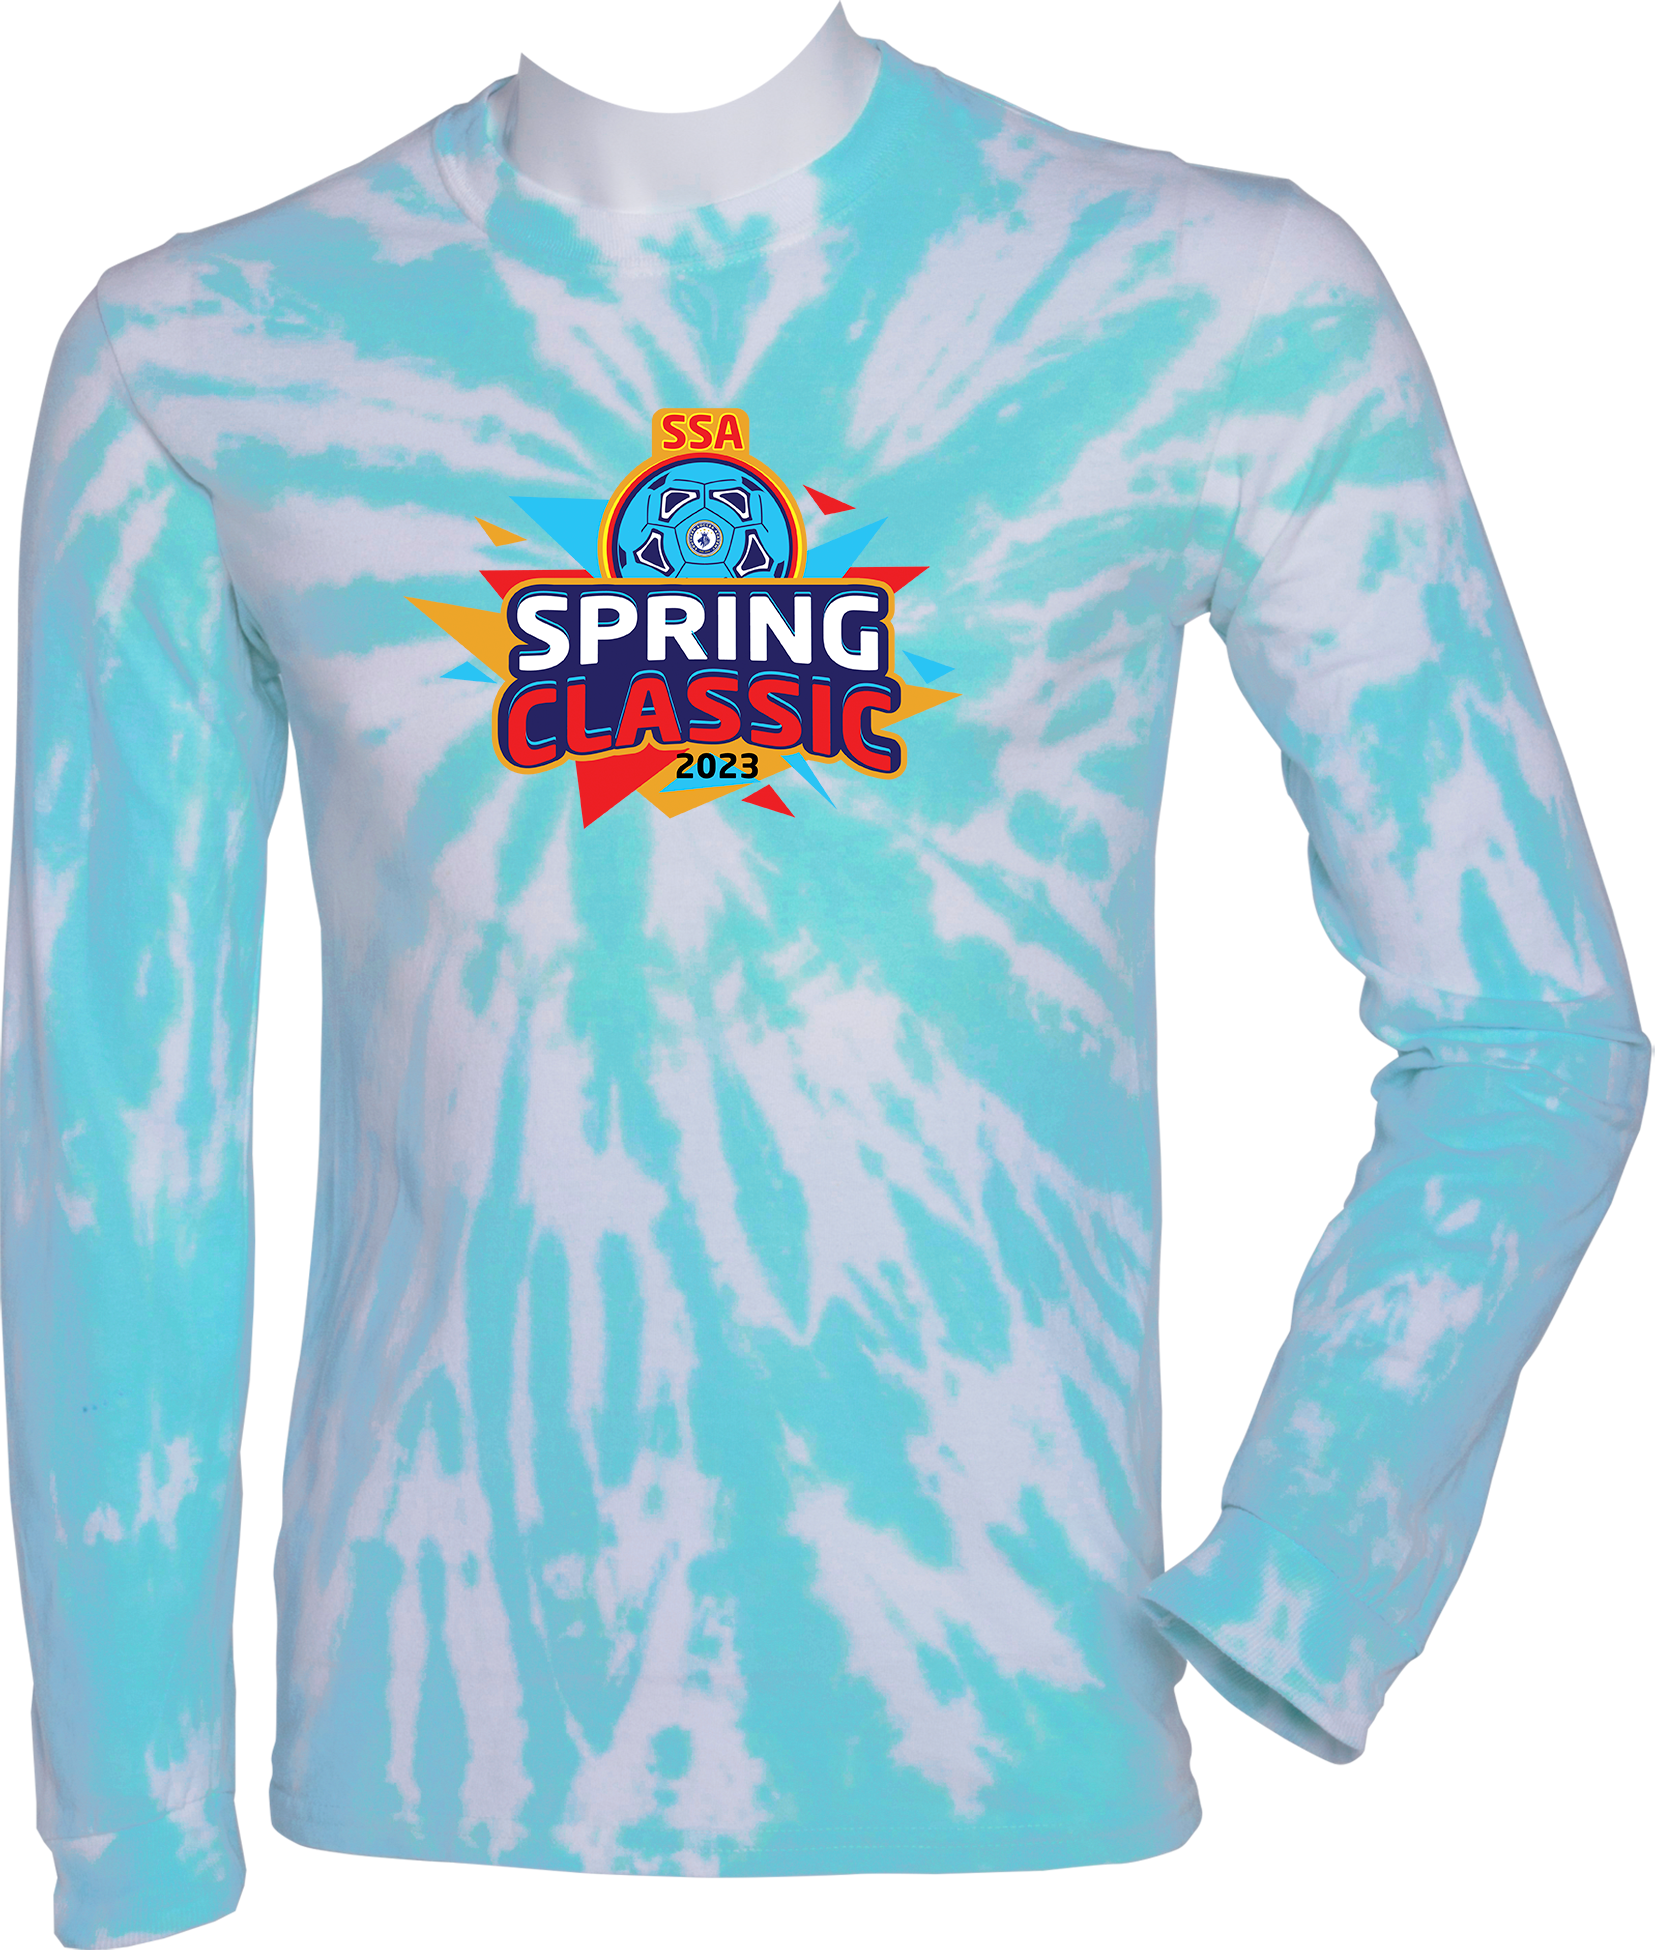 TIE-DYE LONG SLEEVES - 2023 SSA Spring Classic